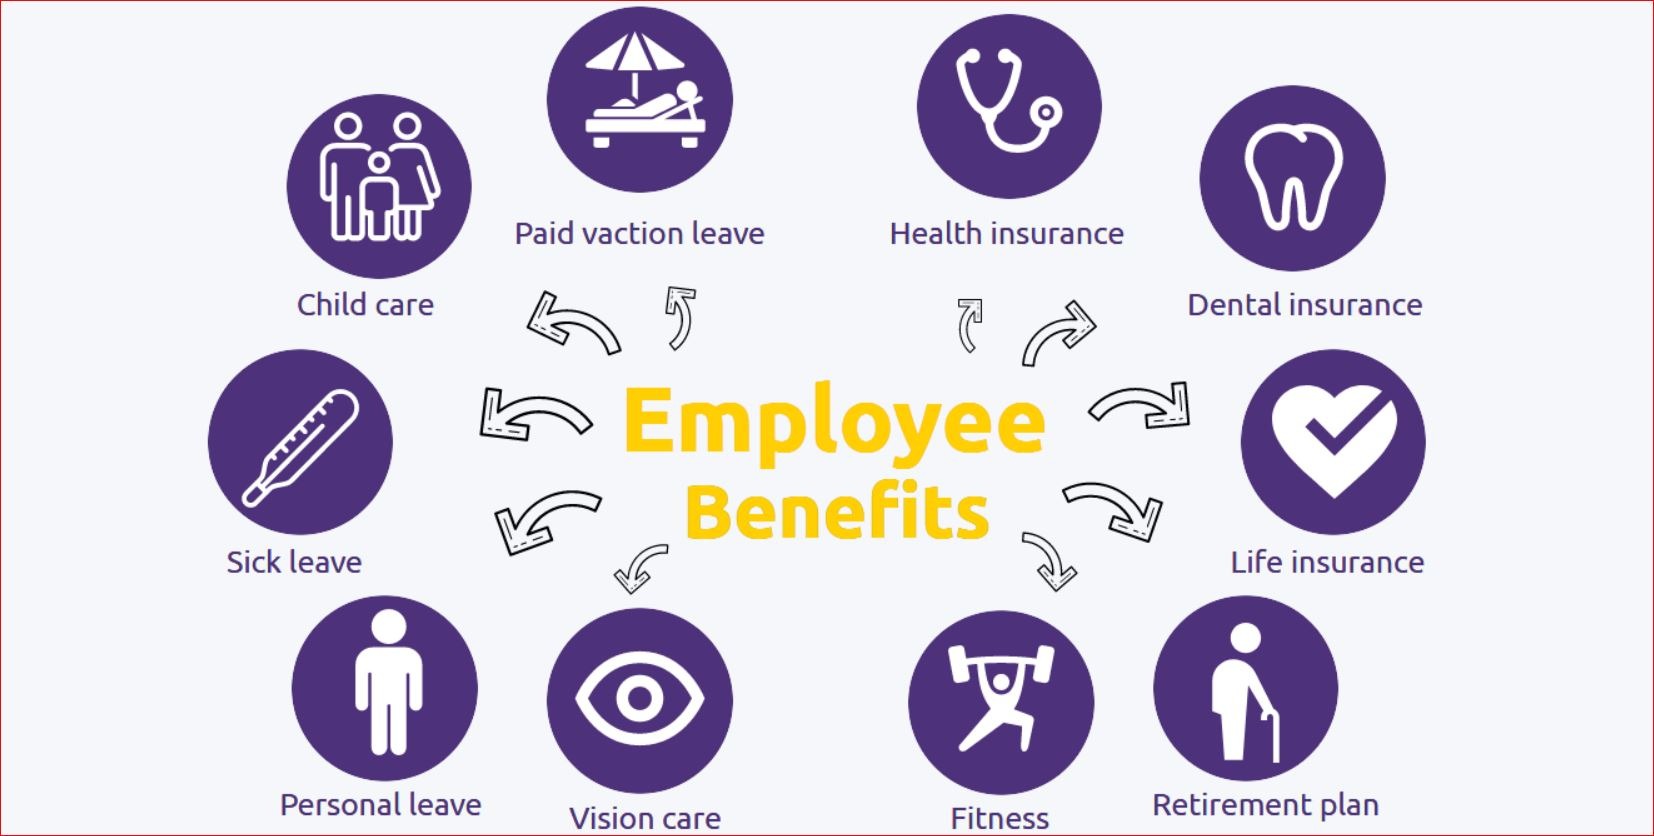 Benefit5approve assignmentparams twoprevyearsinsurers. Employee benefits. Job benefits. Benefits for Employees. Perks and benefits.